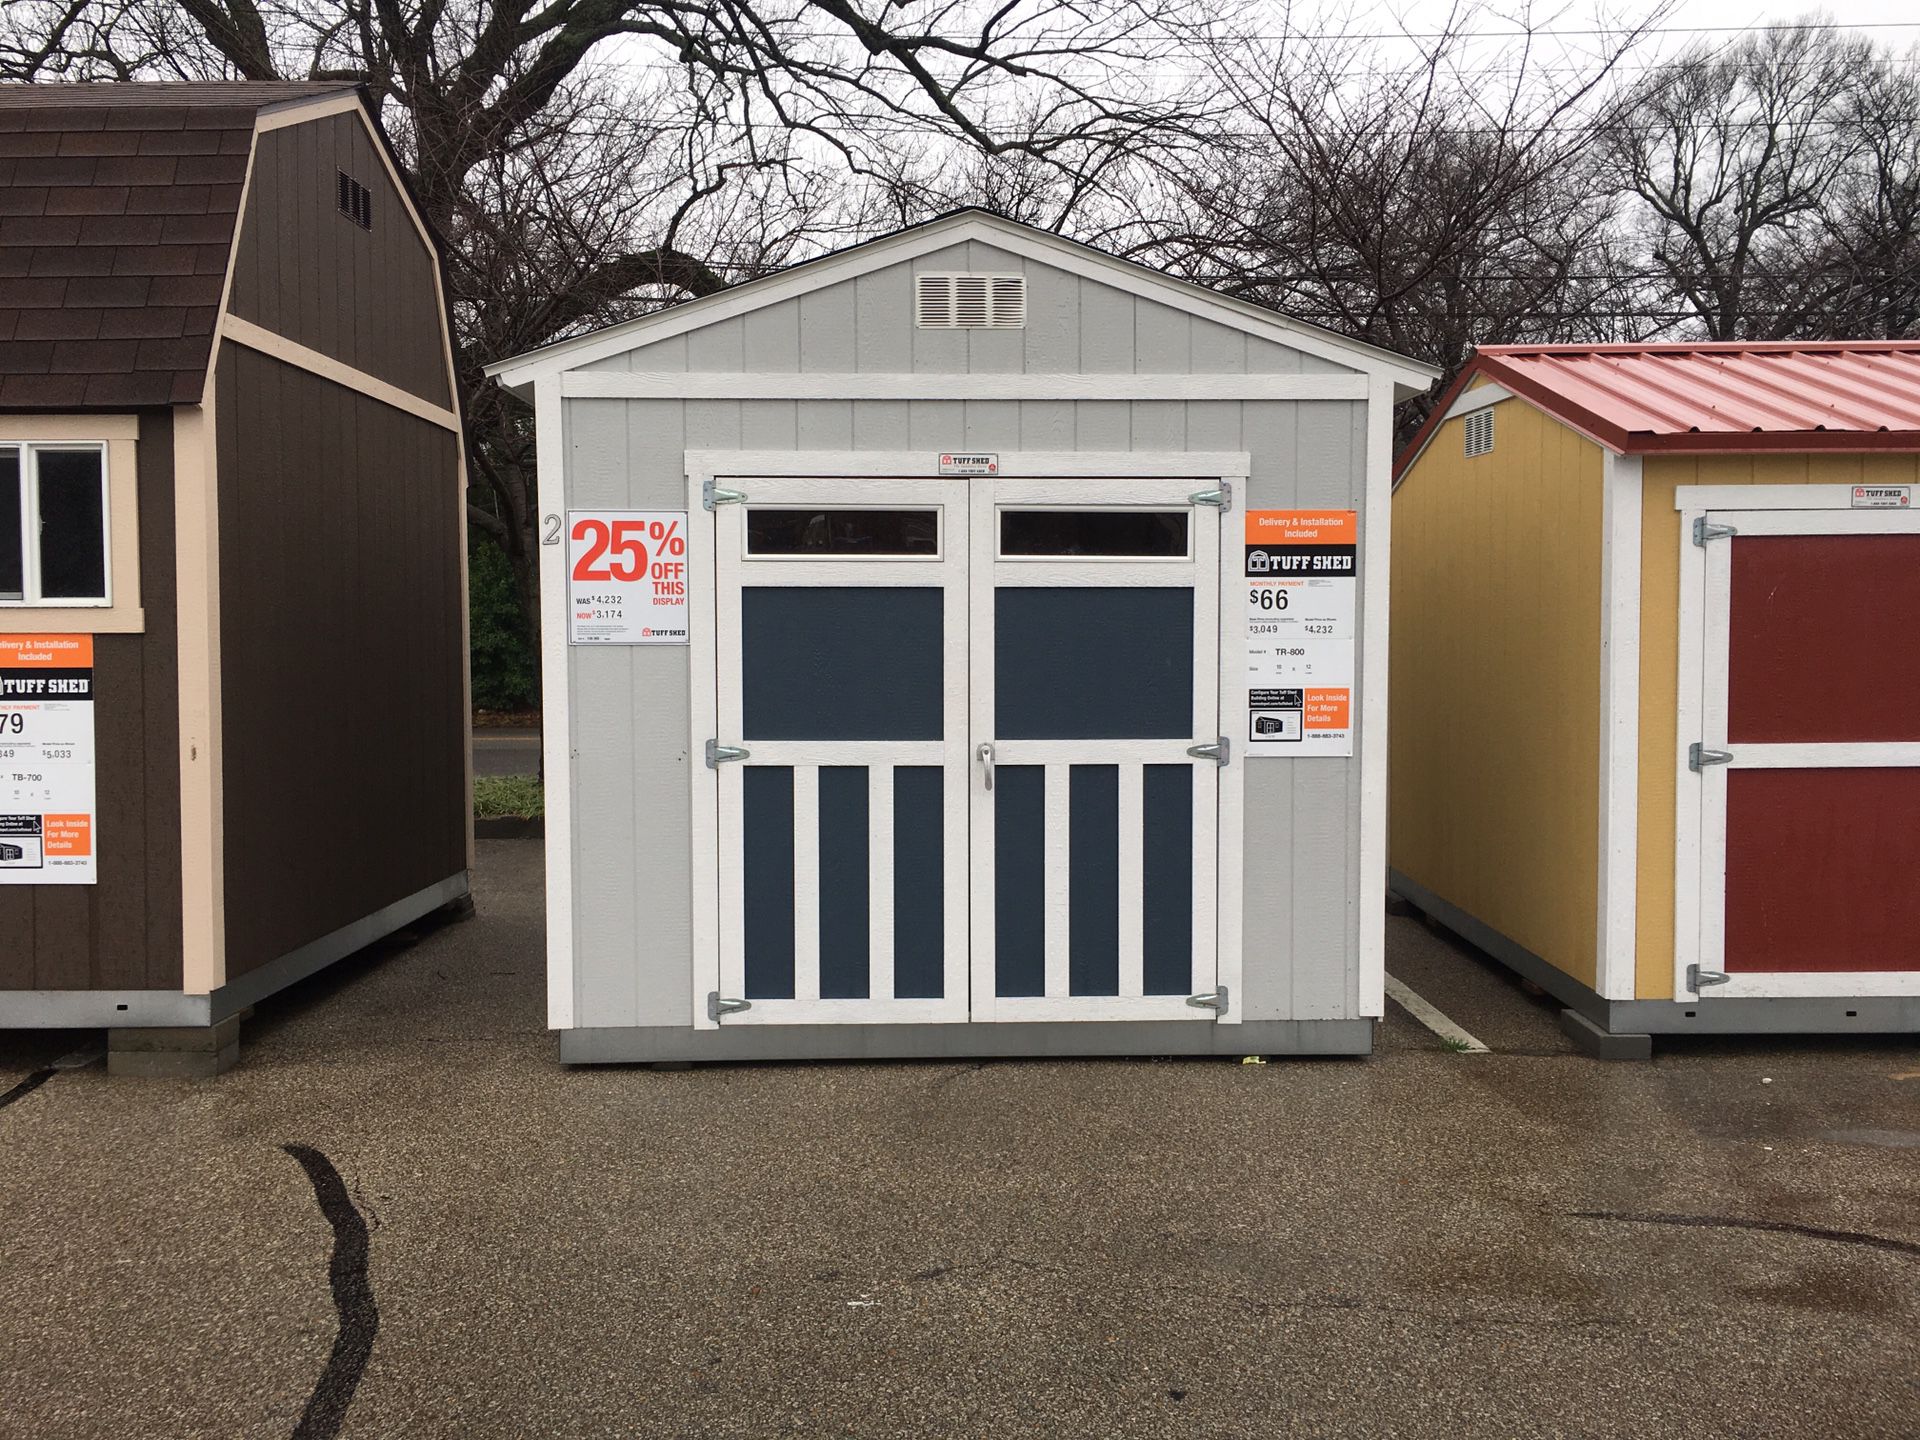 Tuff Shed model TR 800. 10 x 12. Was $4232. Now $3174. Save $1058! Includes free delivery and installation.